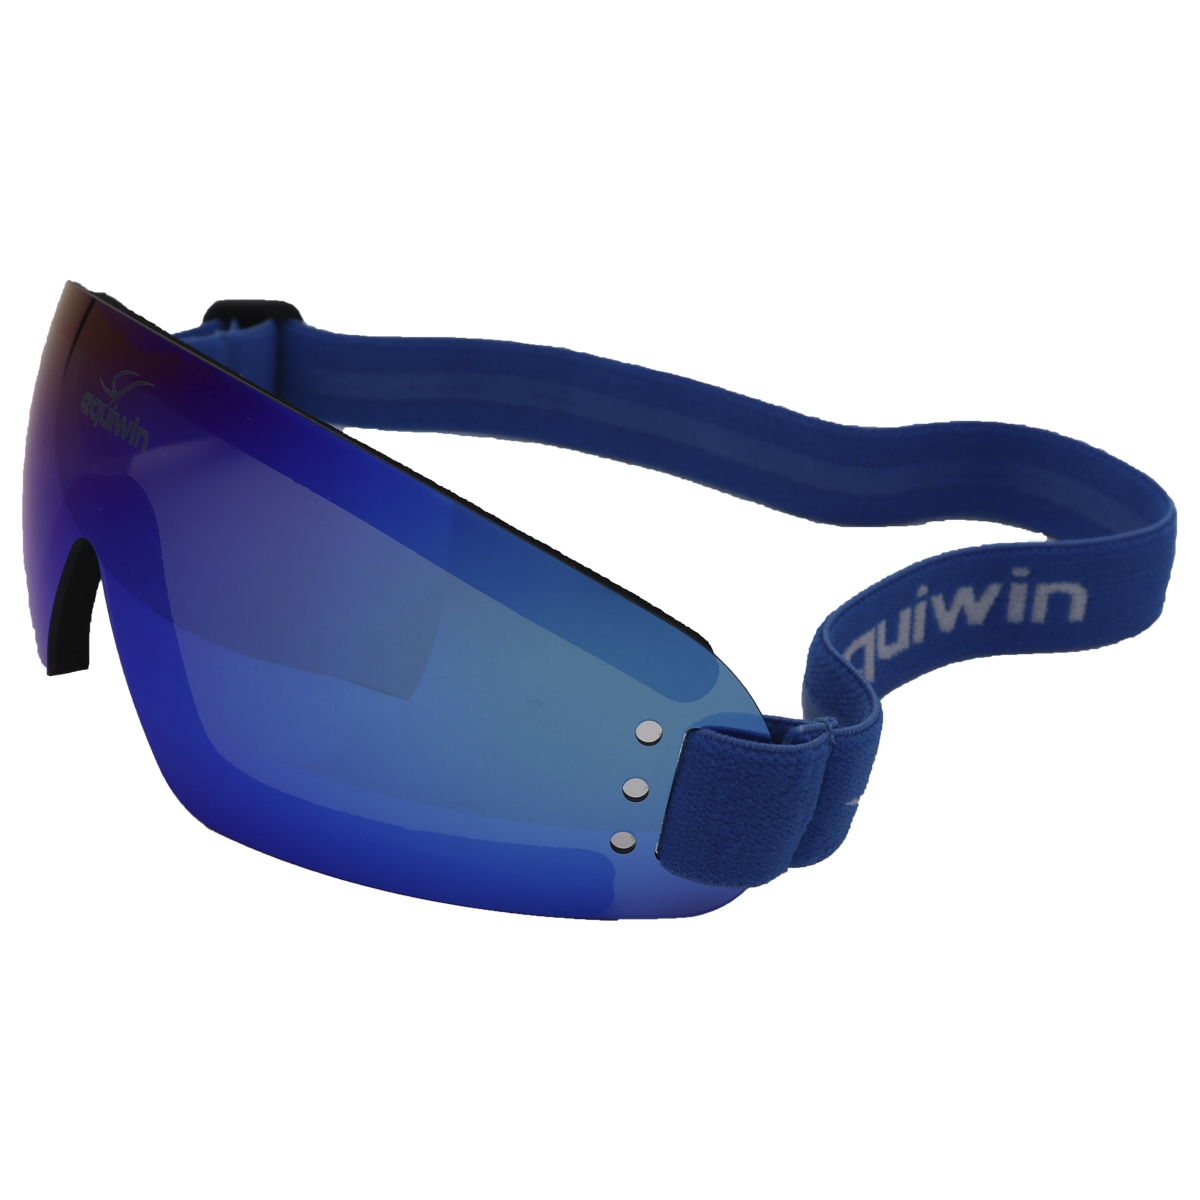 Equiwin Boundless XR: Advanced Riding Goggles